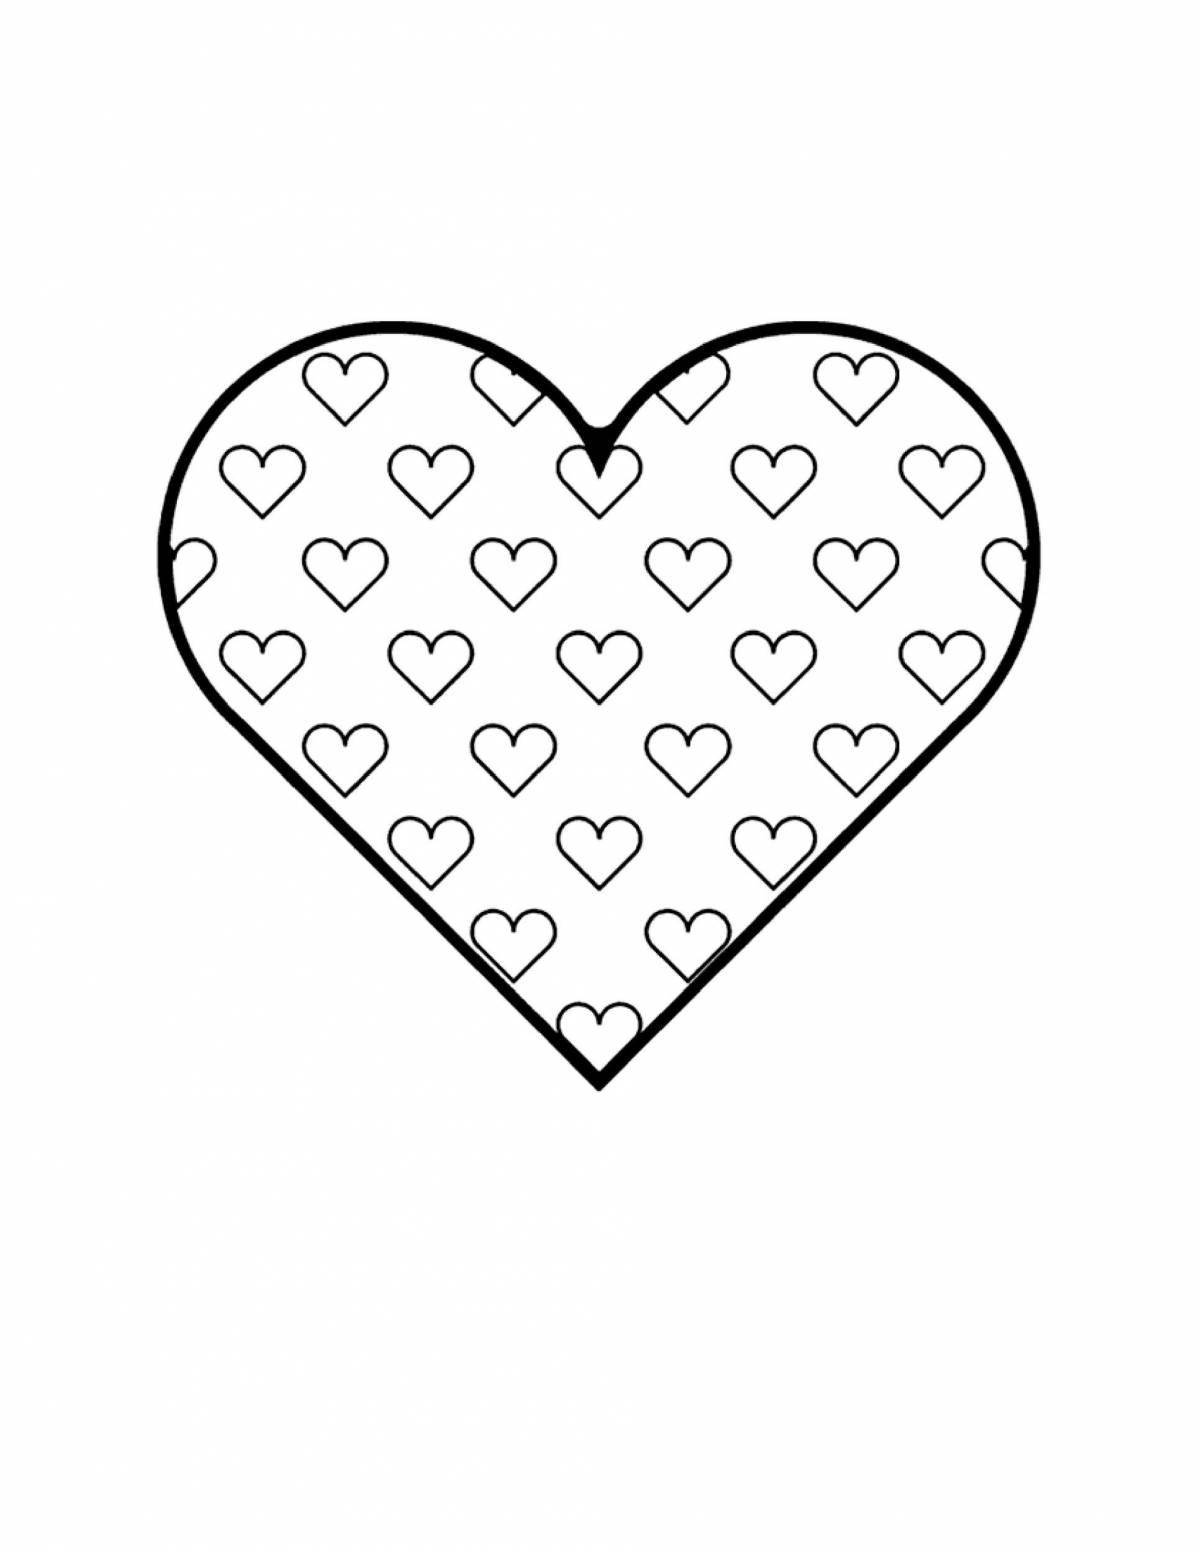 Sparkly coloring pages with hearts